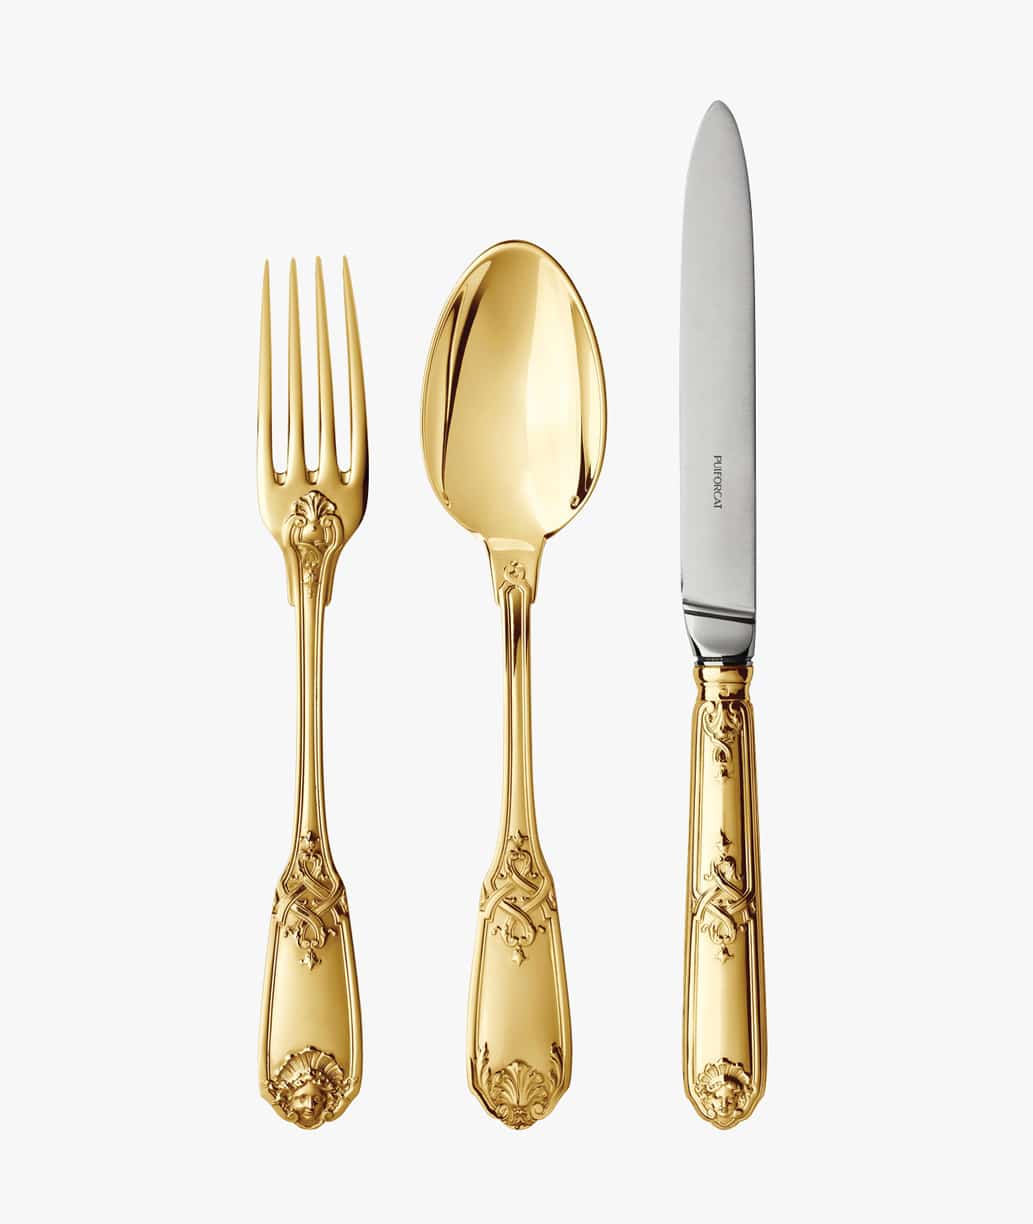 Three pieces of cutlery in sterling silver and a gold gilt finish from Molière Mascaron collection from Puiforcat